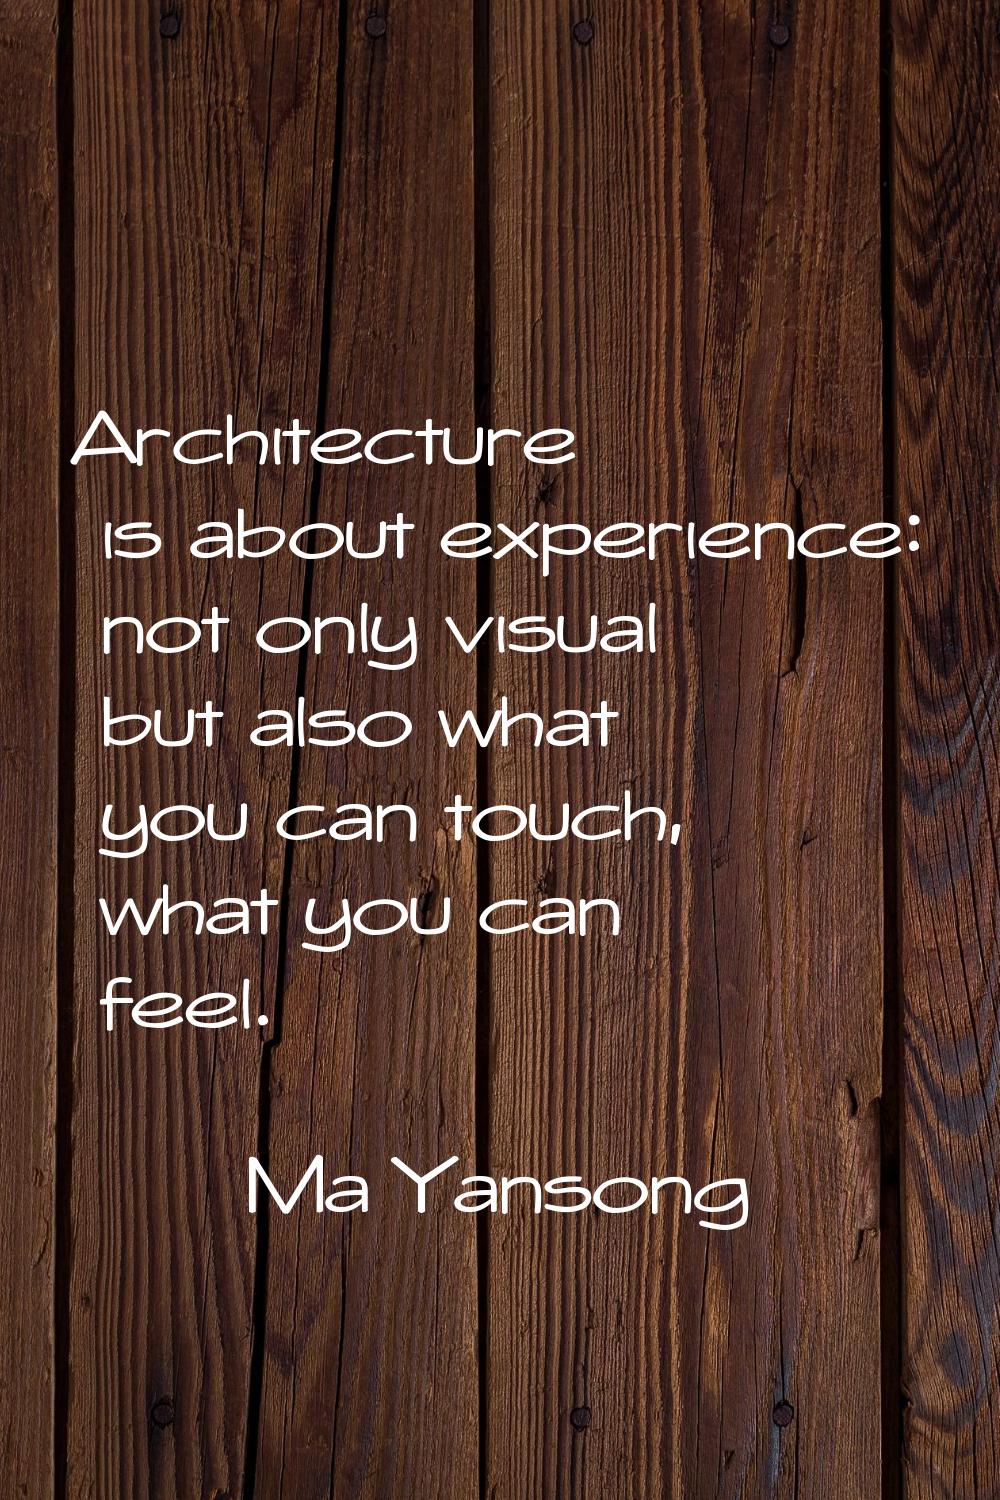 Architecture is about experience: not only visual but also what you can touch, what you can feel.